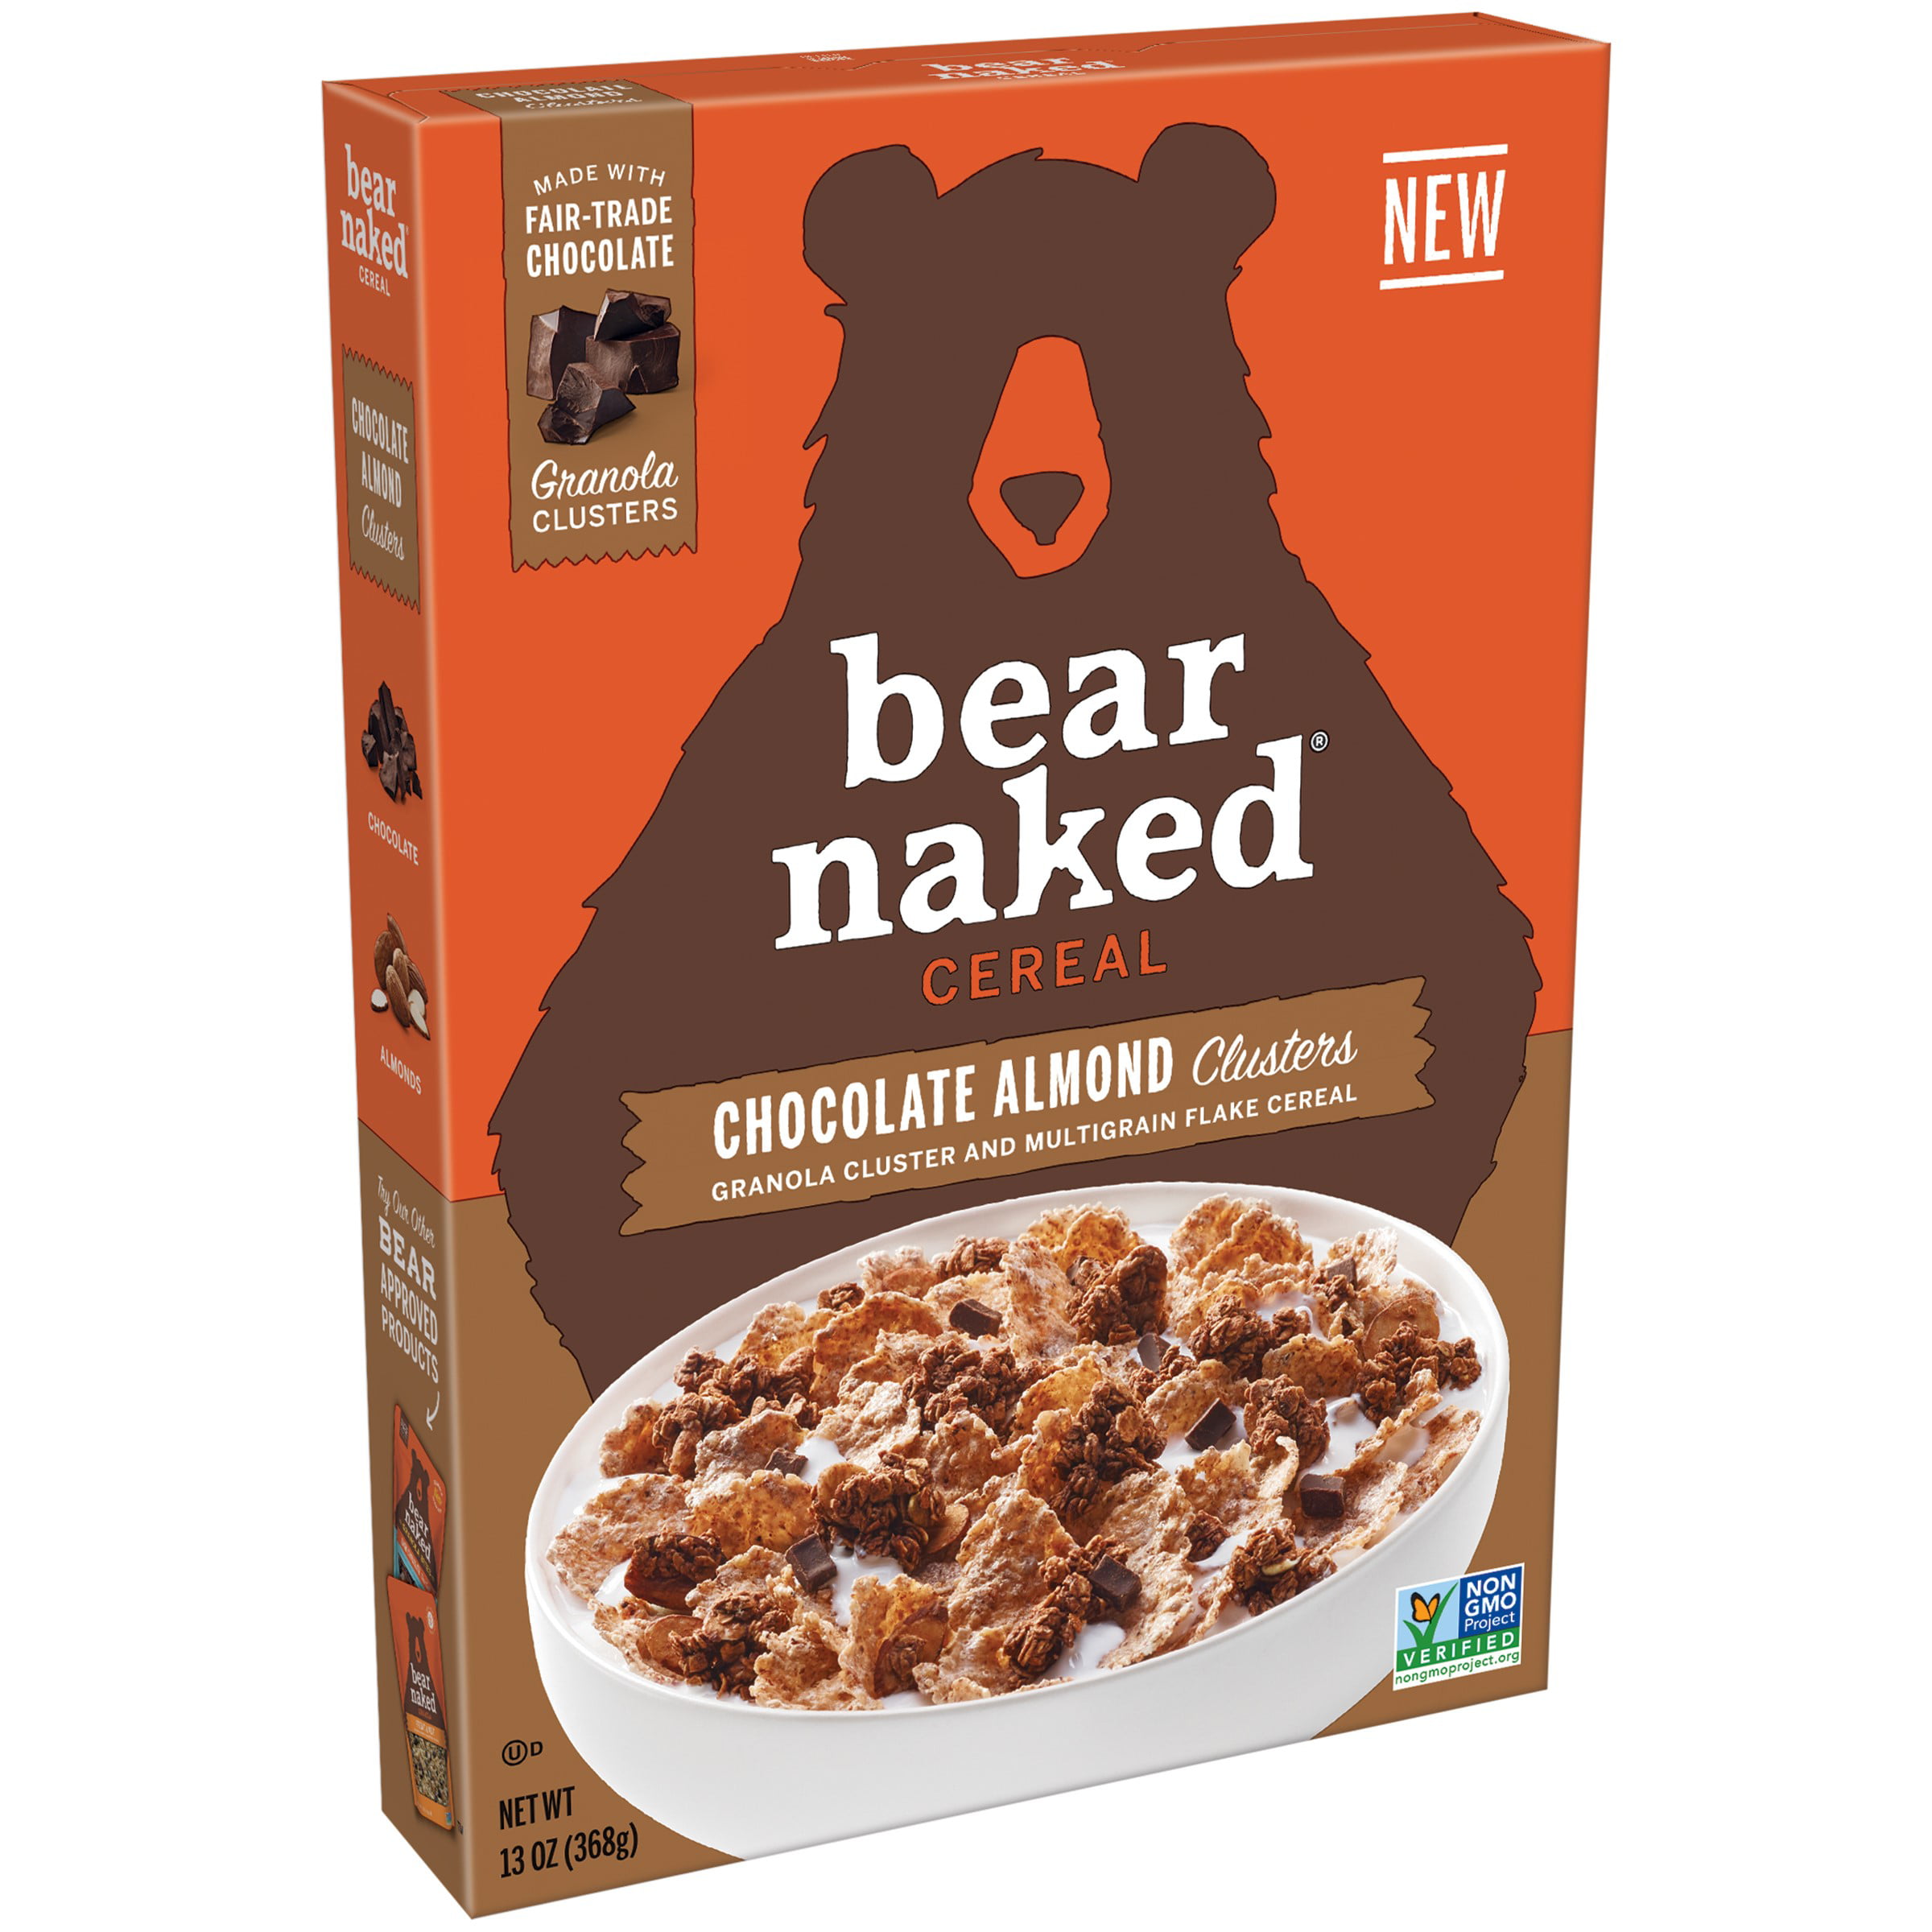 Bear Naked Cereal, Chocolate Almond Granola Clusters, 13 